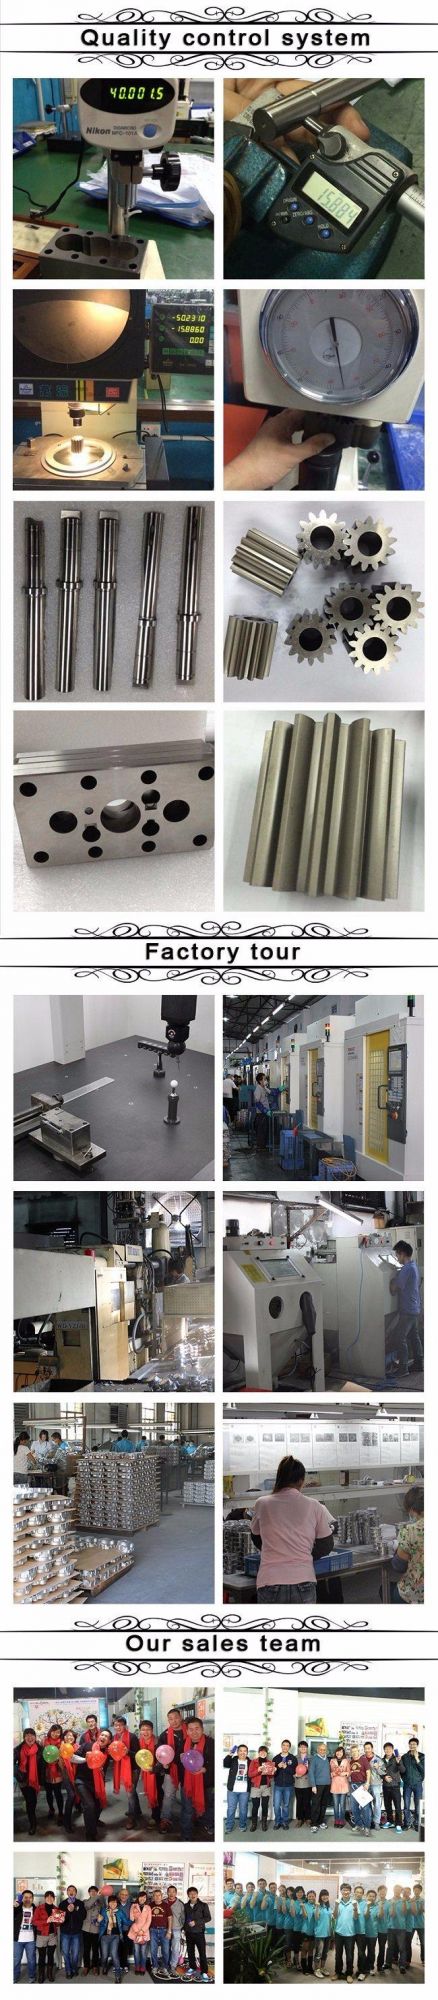 Stainless Steel CNC Machining Parts